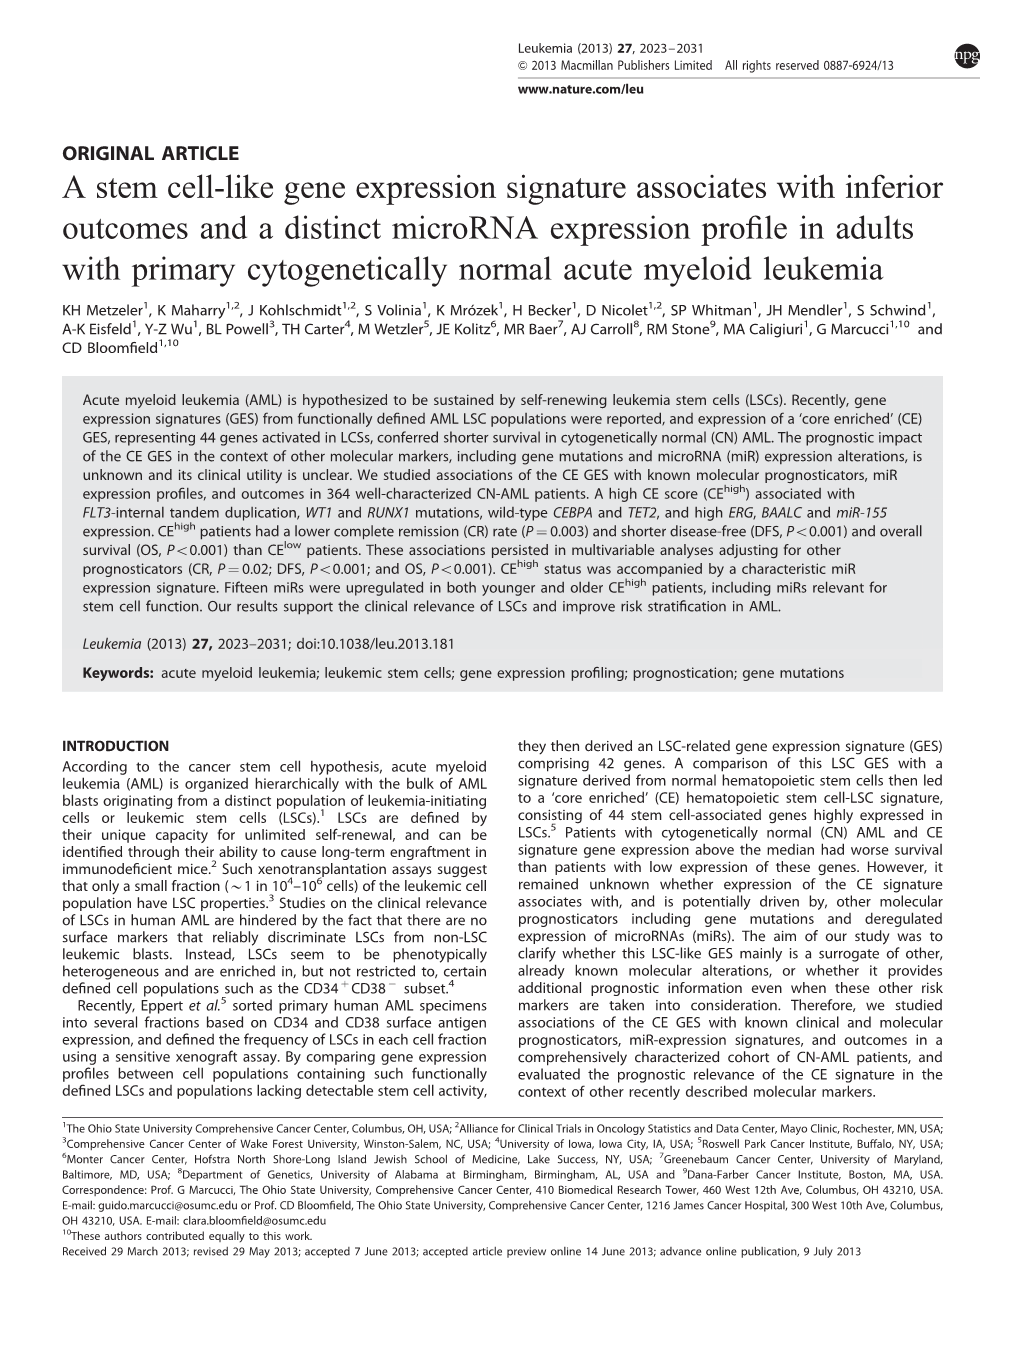 A Stem Cell-Like Gene Expression Signature Associates with Inferior